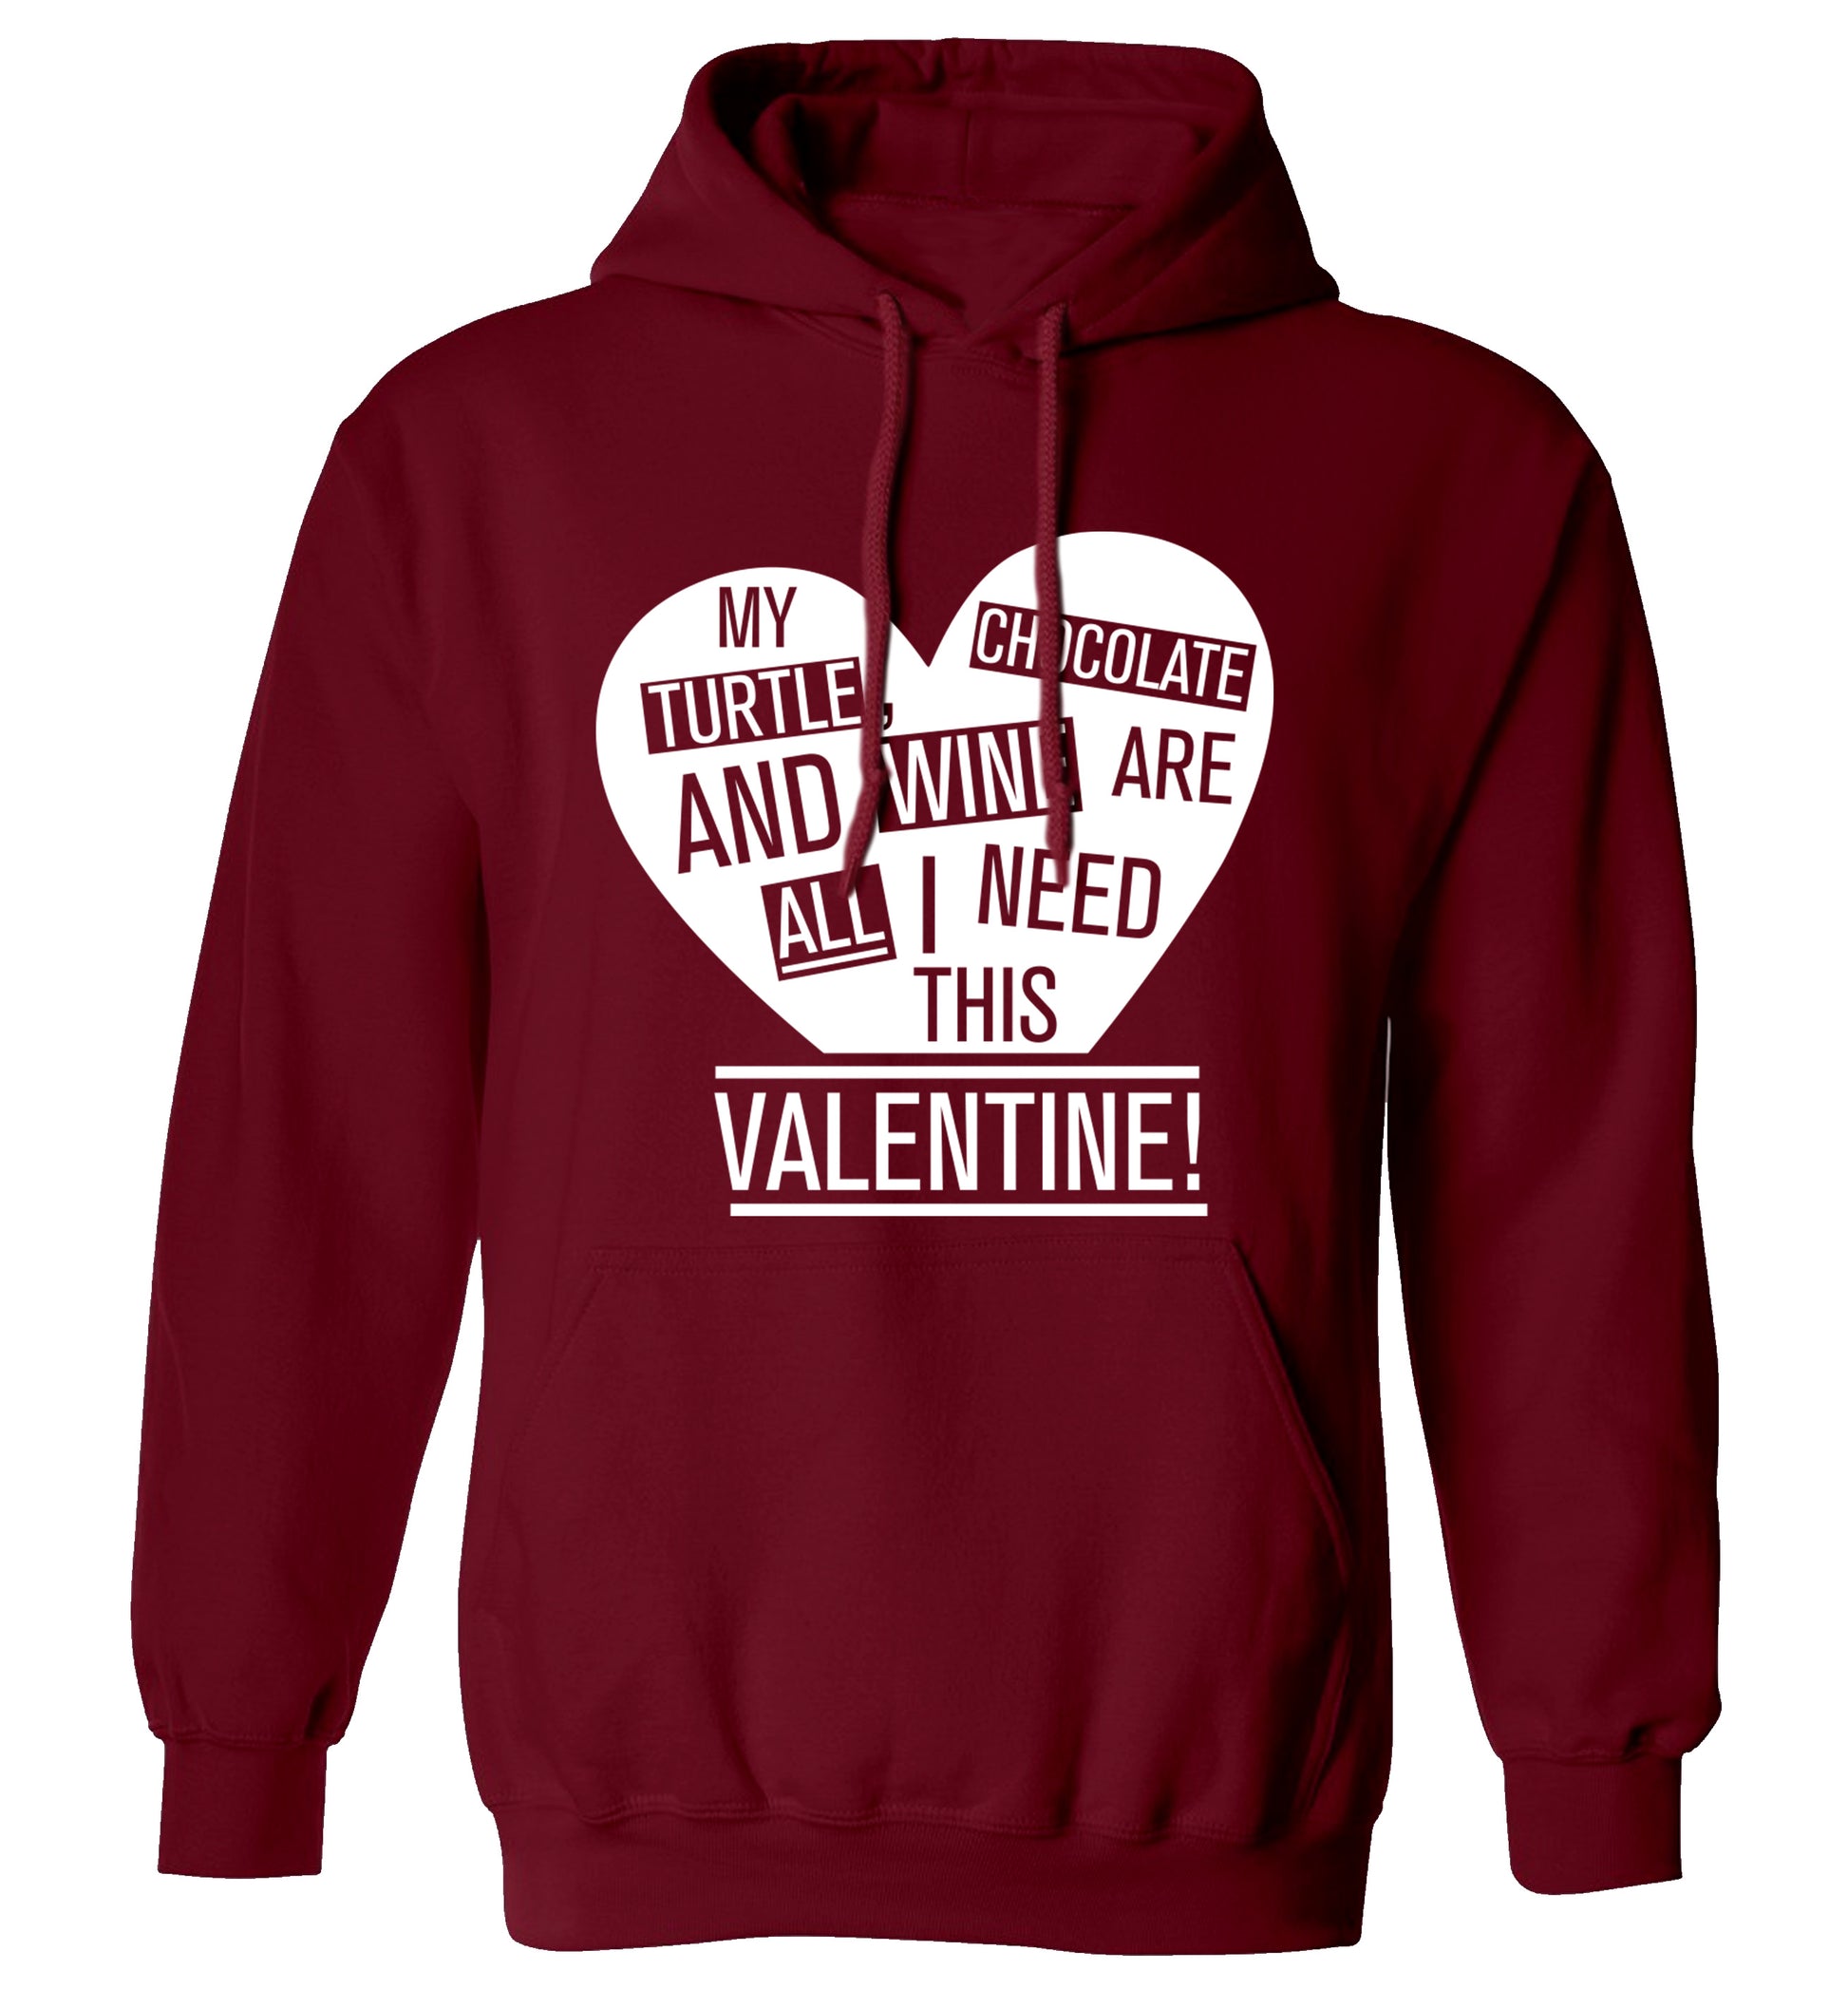 My turtle, chocolate and wine are all I need this valentine! adults unisex maroon hoodie 2XL